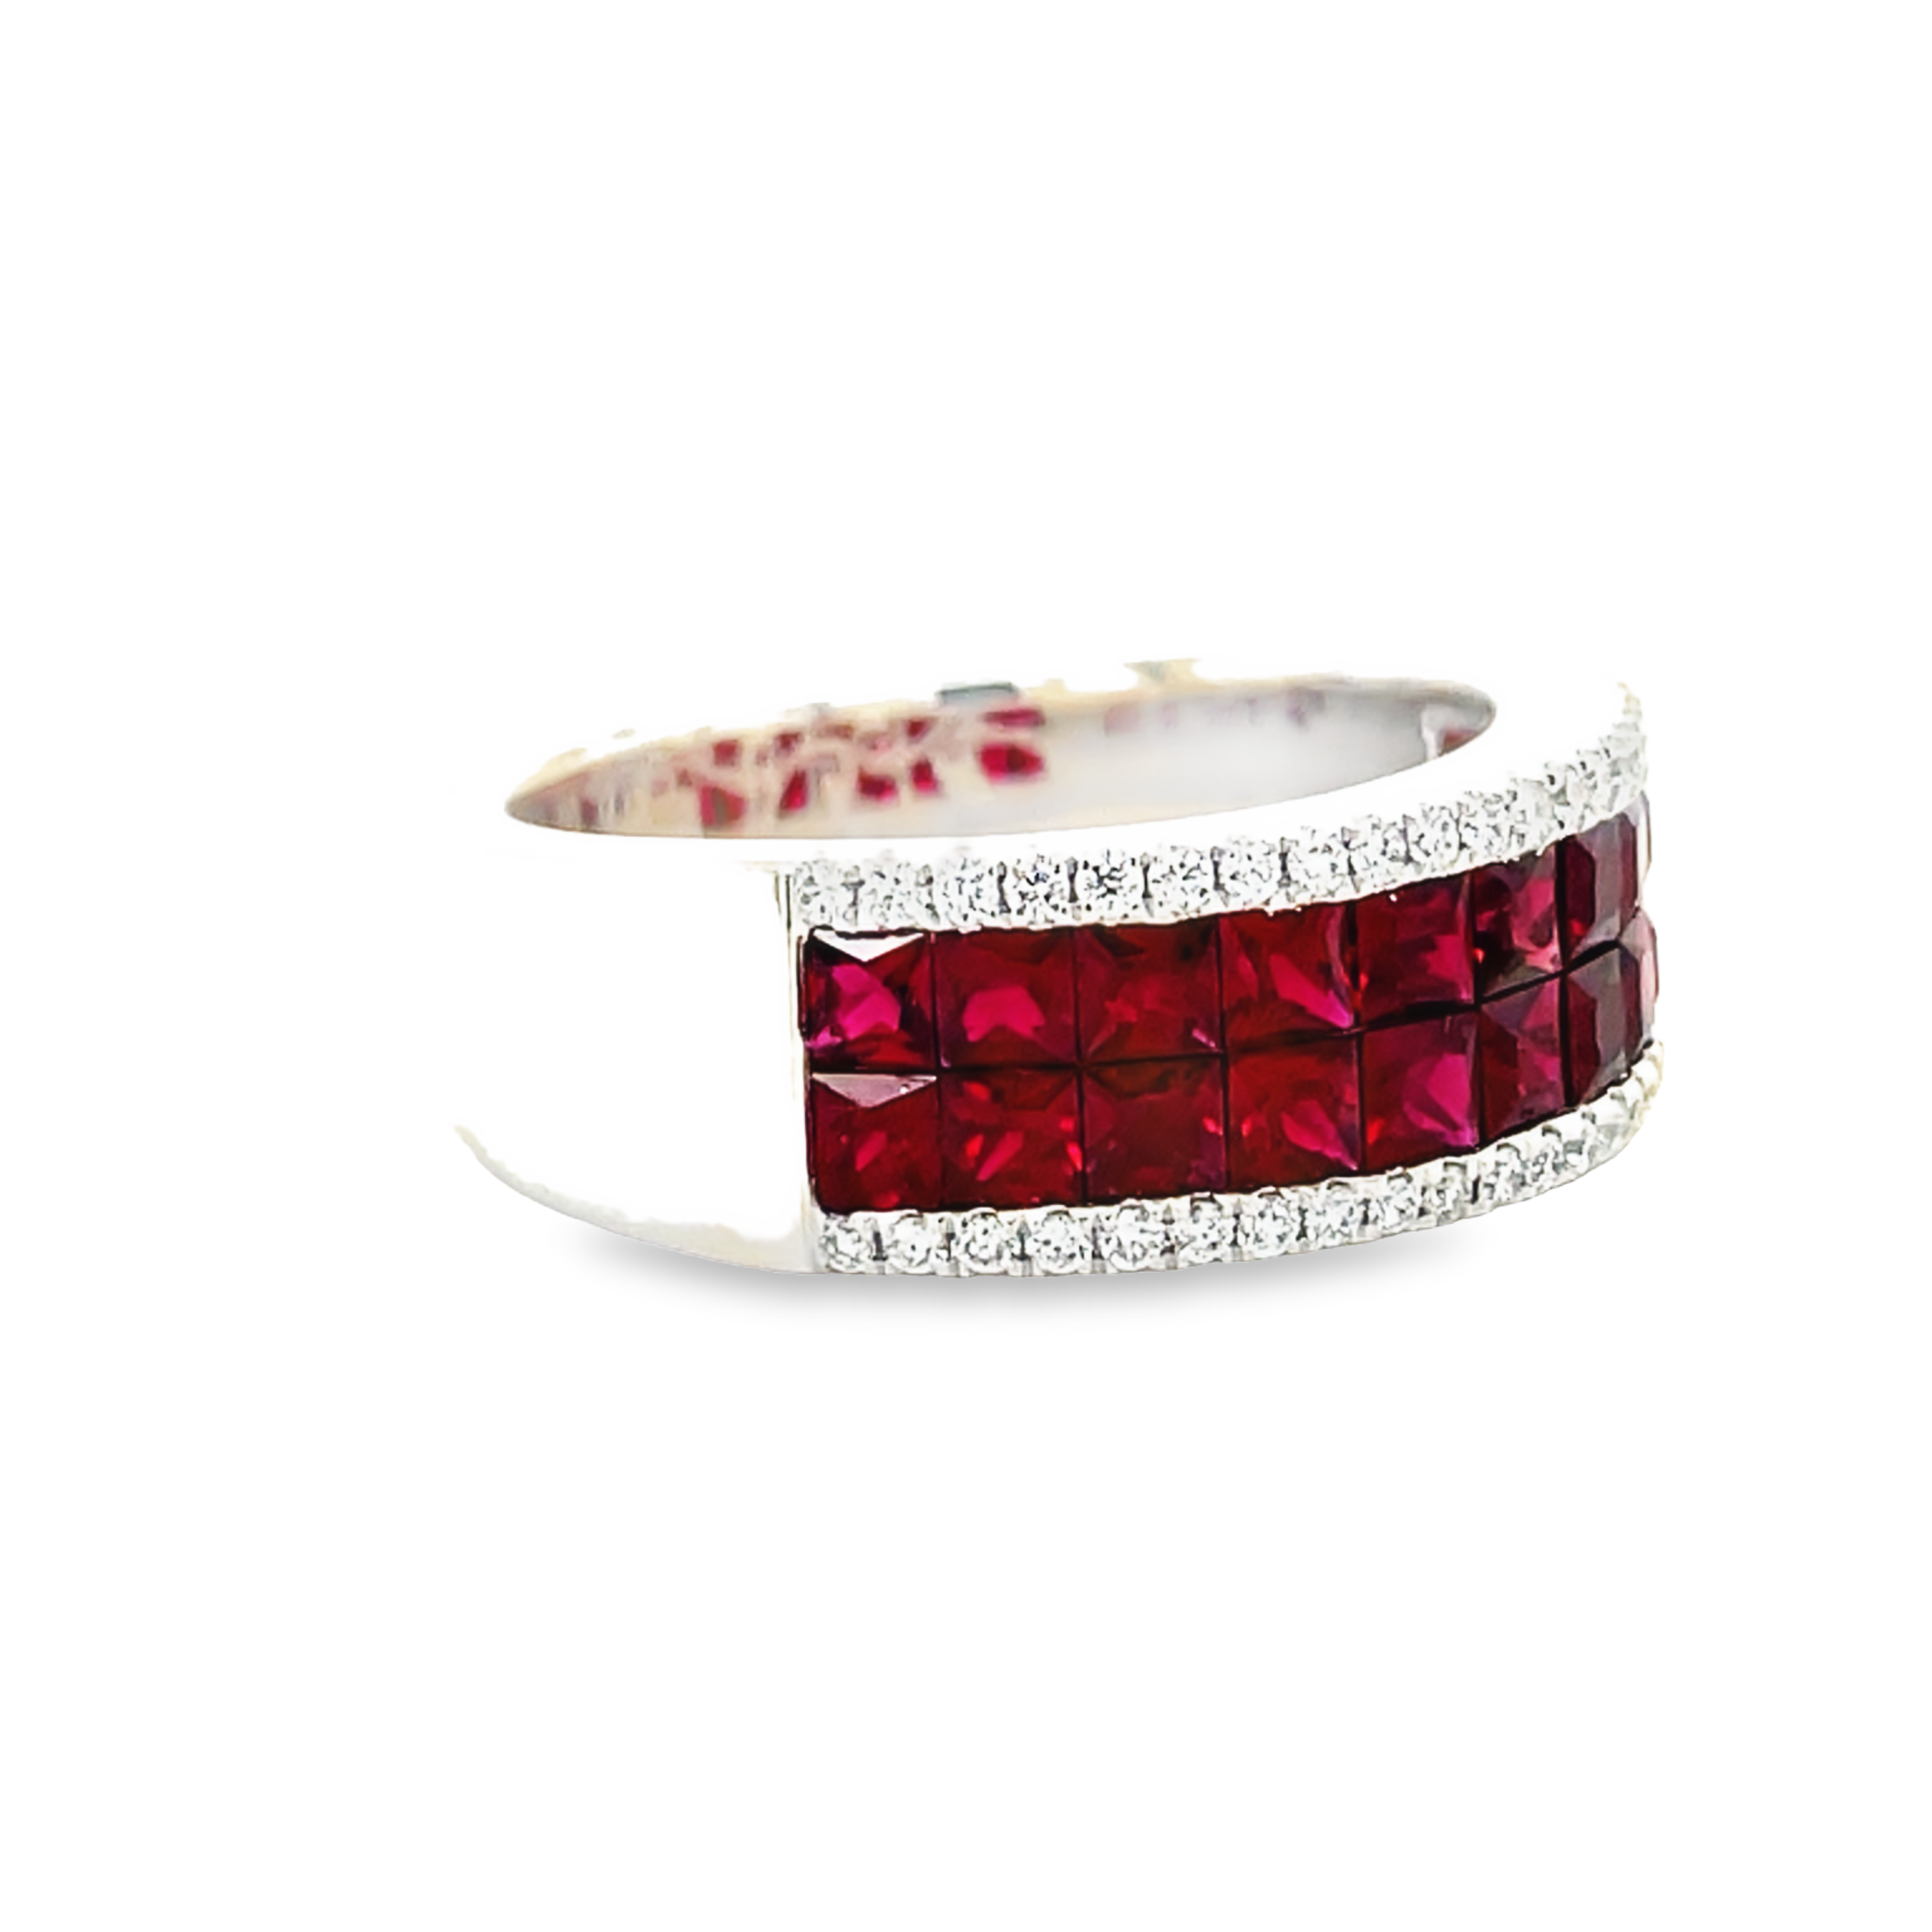 14k white gold ring  Princess cut rubies 2.00 cts  Round diamonds 0.22cts.  Thich shank  7.50 mm width. Size 6 (sizeable)